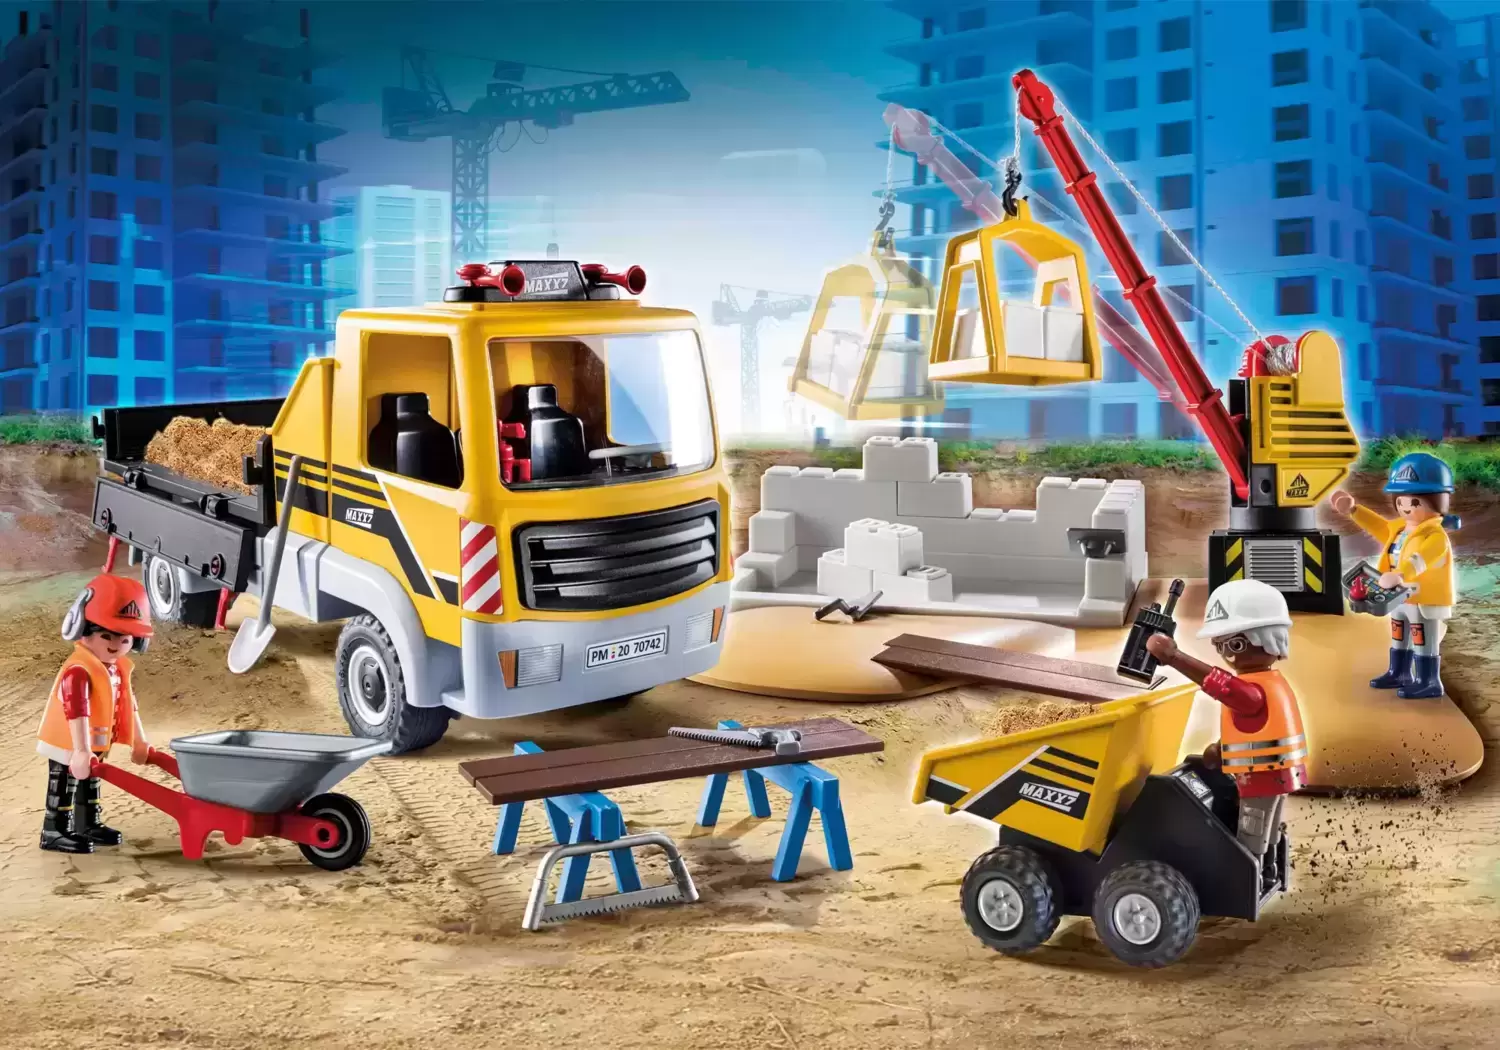 Playmobil Builders - Construction site with dump truck